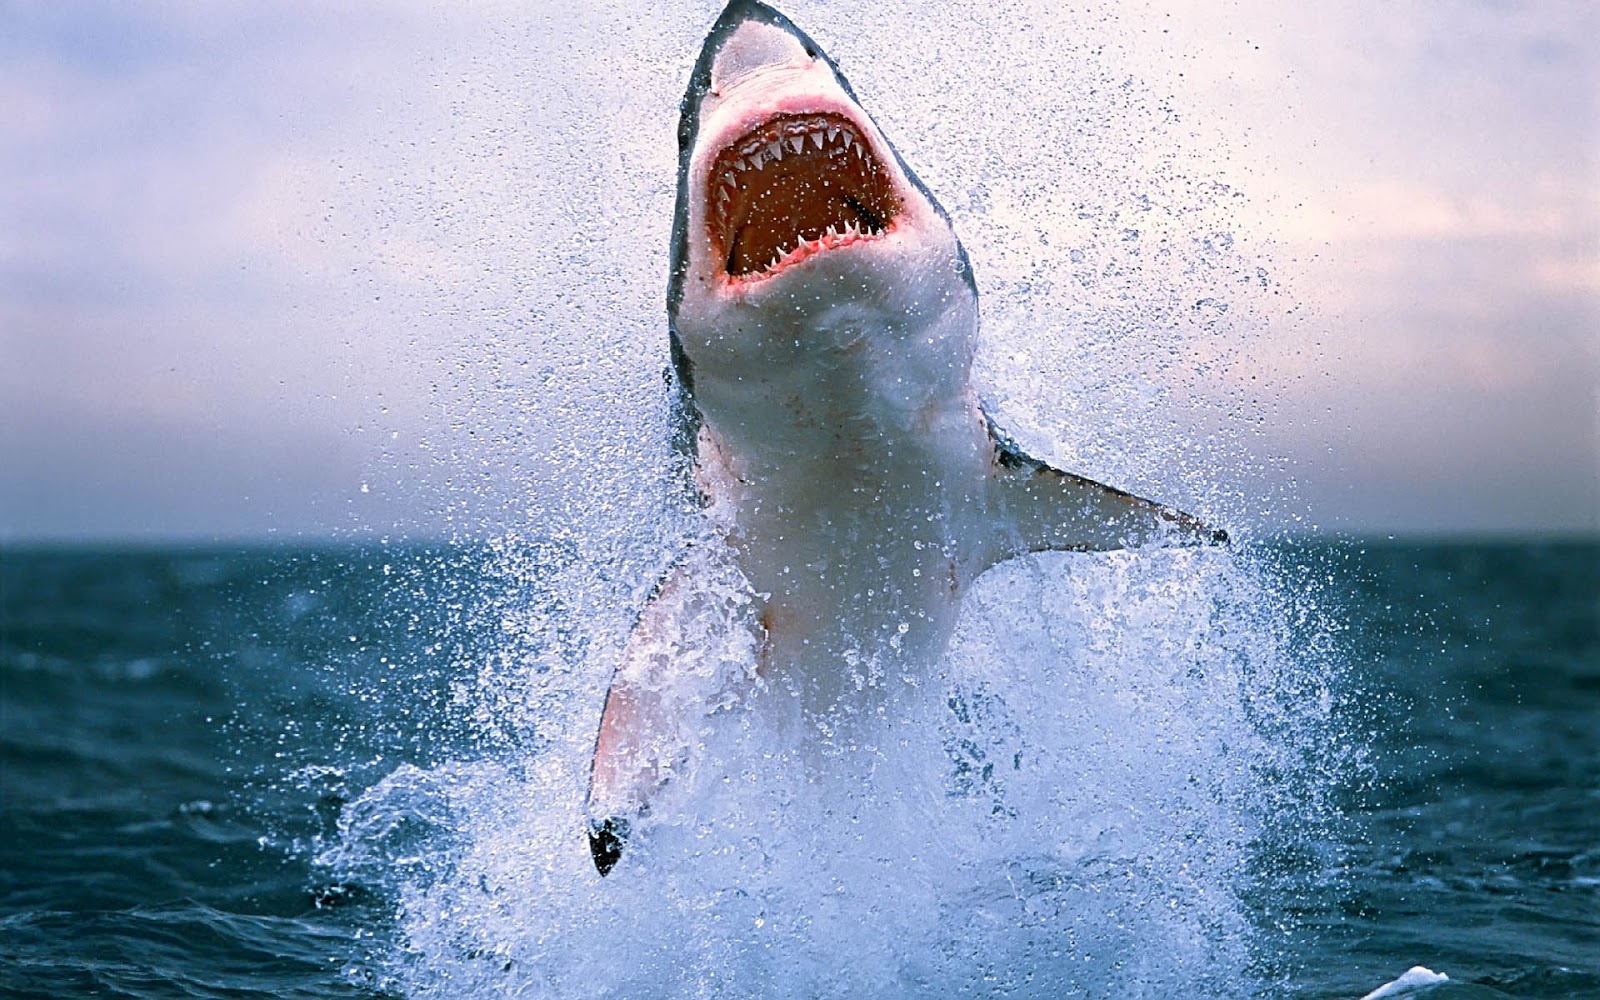 HD Animal Wallpaper Of A Attacking Shark Jumping Out The Water